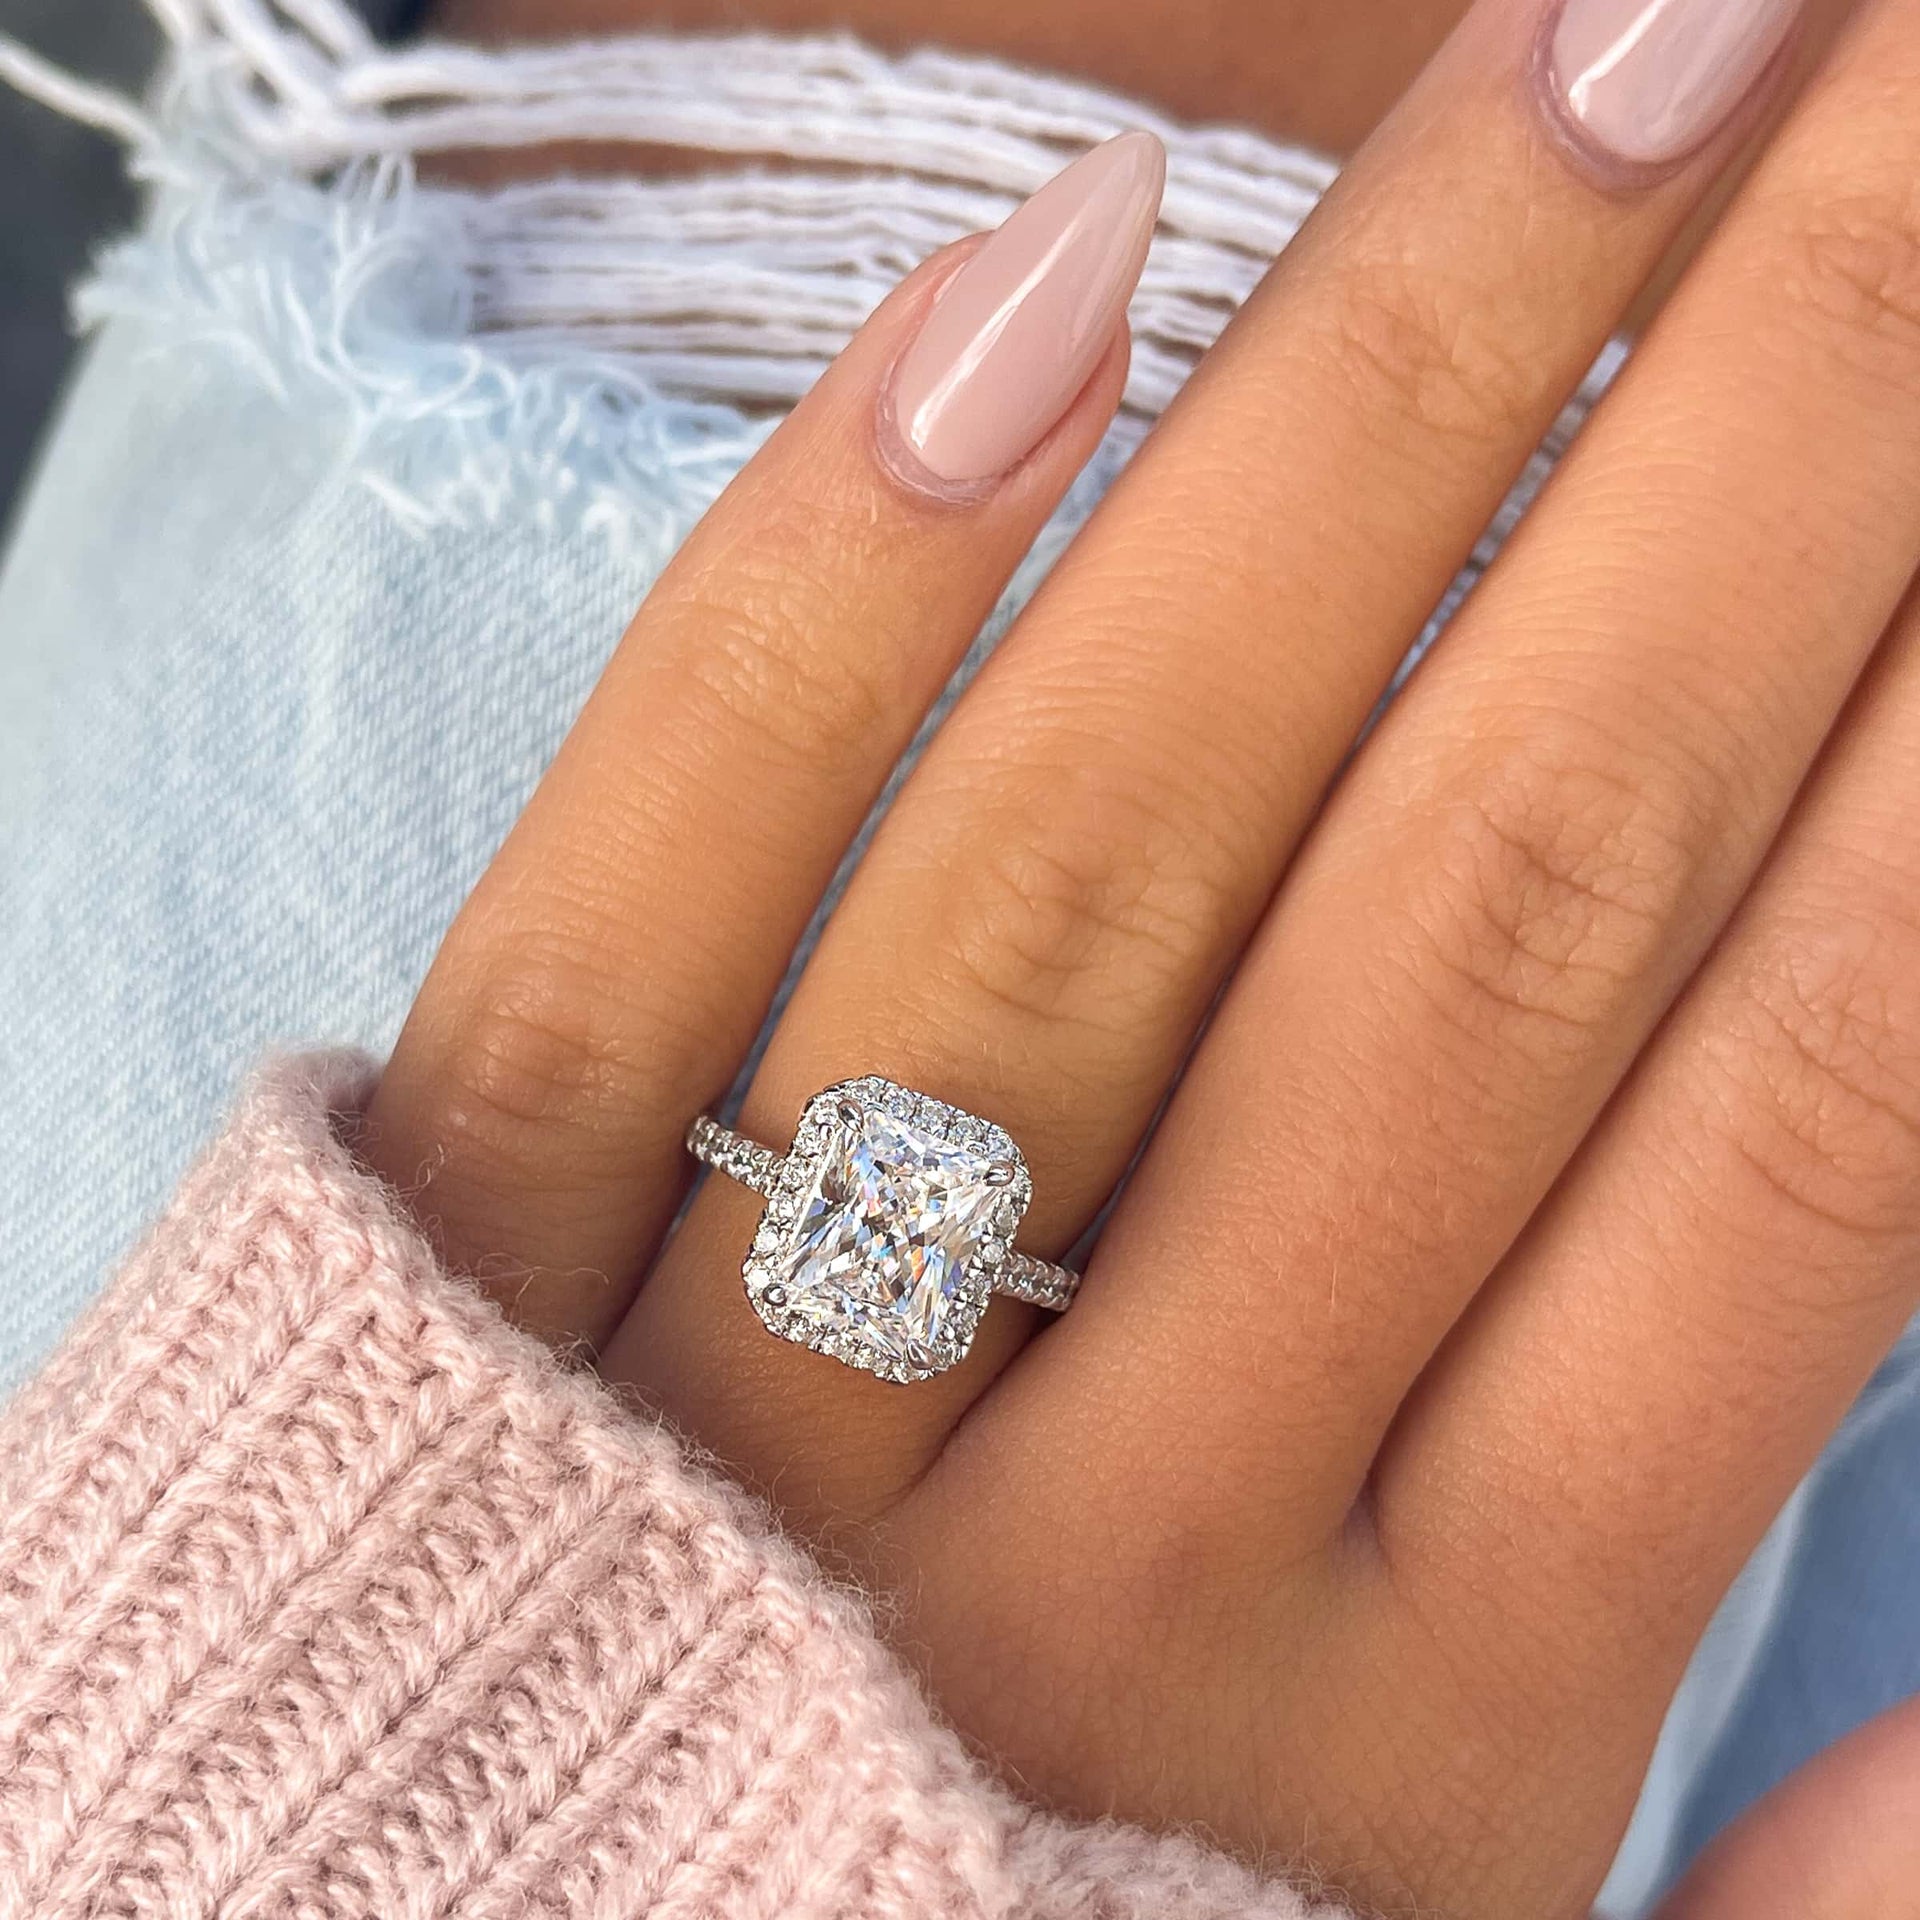 silver radiant cut engagement ring with halo and half eternity band detailing on female hand wearing a pink sweater